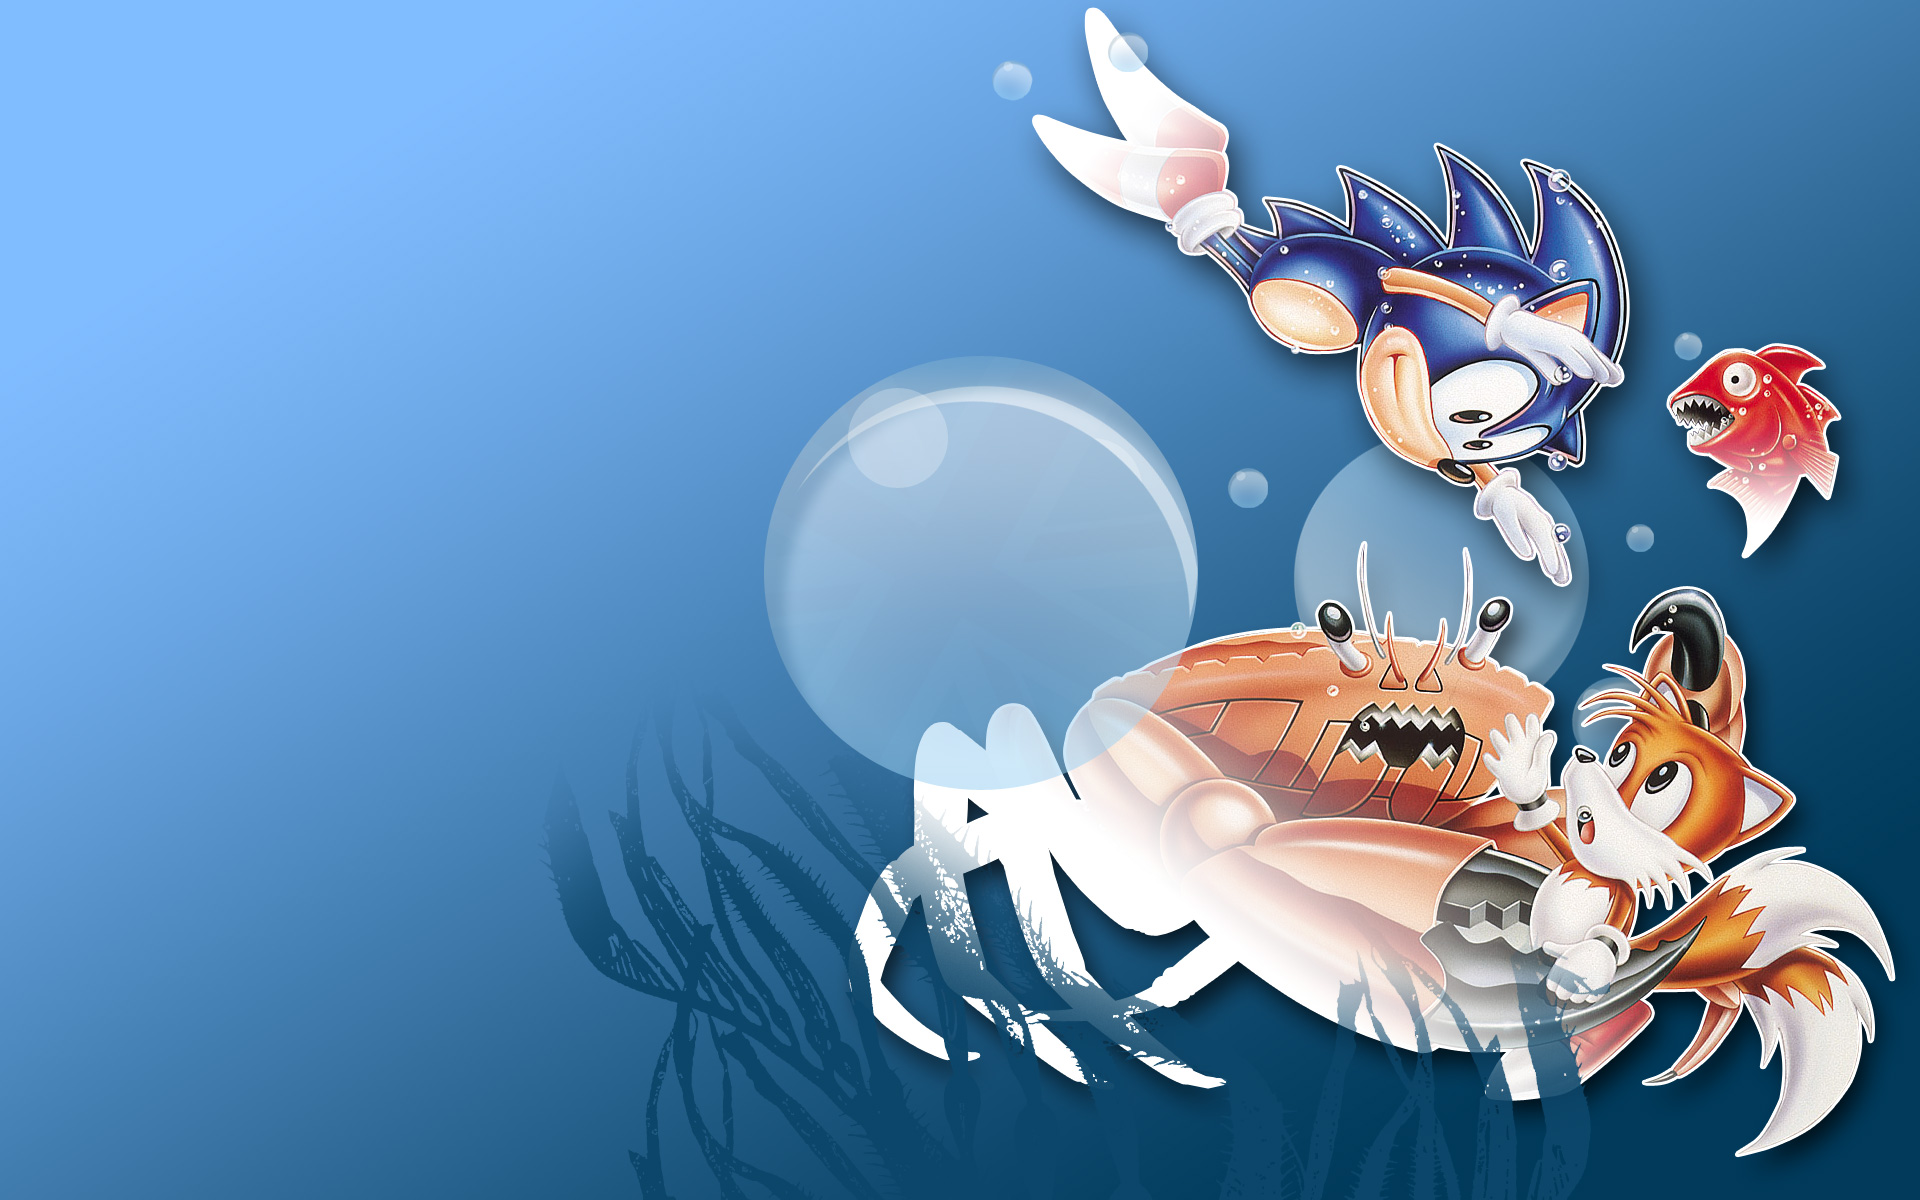 Sonic Underwater Porn - UK:RESISTANCE: THE GREATEST SONIC THE HEDGEHOG DESKTOP IMAGES IN THE WORLD,  DAY #2